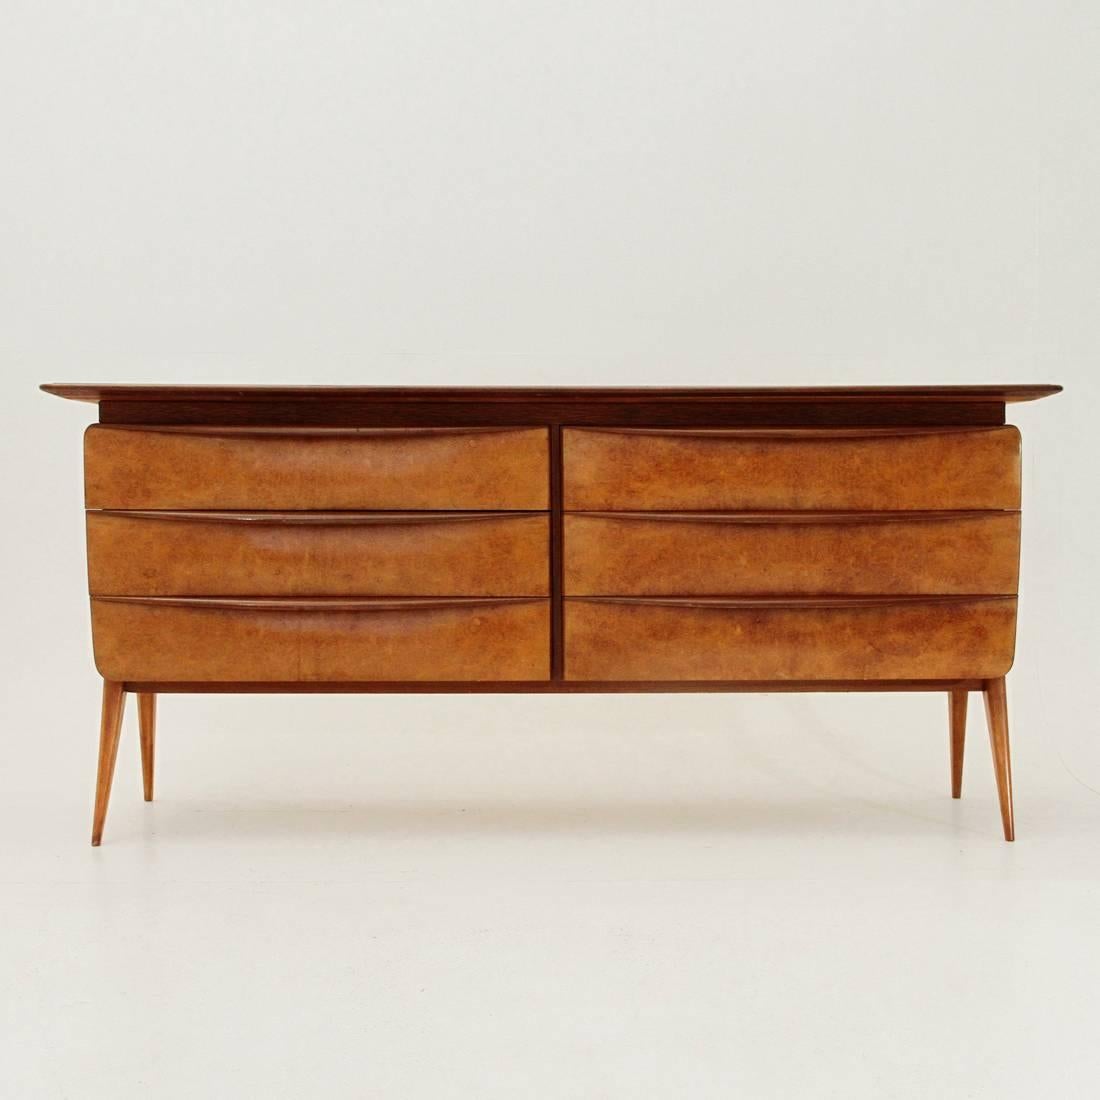 Beautiful chest of drawers of the 1950s, Italian manufactory.
Wooden frame, framed glass top. Six drawers veneered in burr.
Feet and wooden handles. Large mirror.
Good general condition, foot restored to the presence of wormholes.
Dimensions: